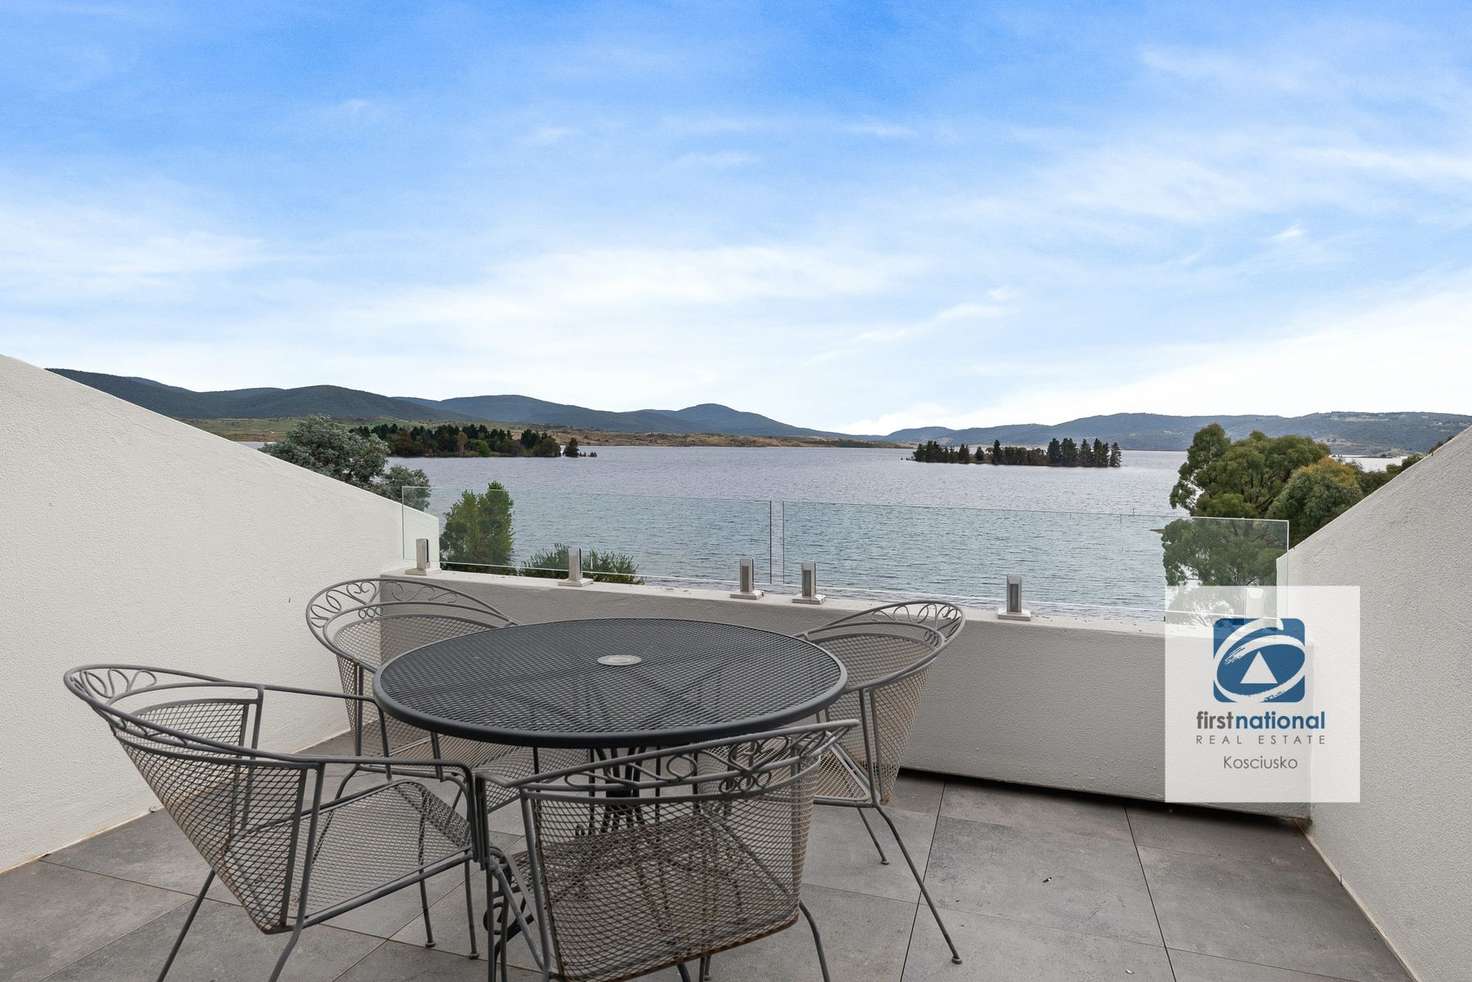 Main view of Homely servicedApartment listing, 323 & 324/10 Kosciuszko Road, Jindabyne NSW 2627